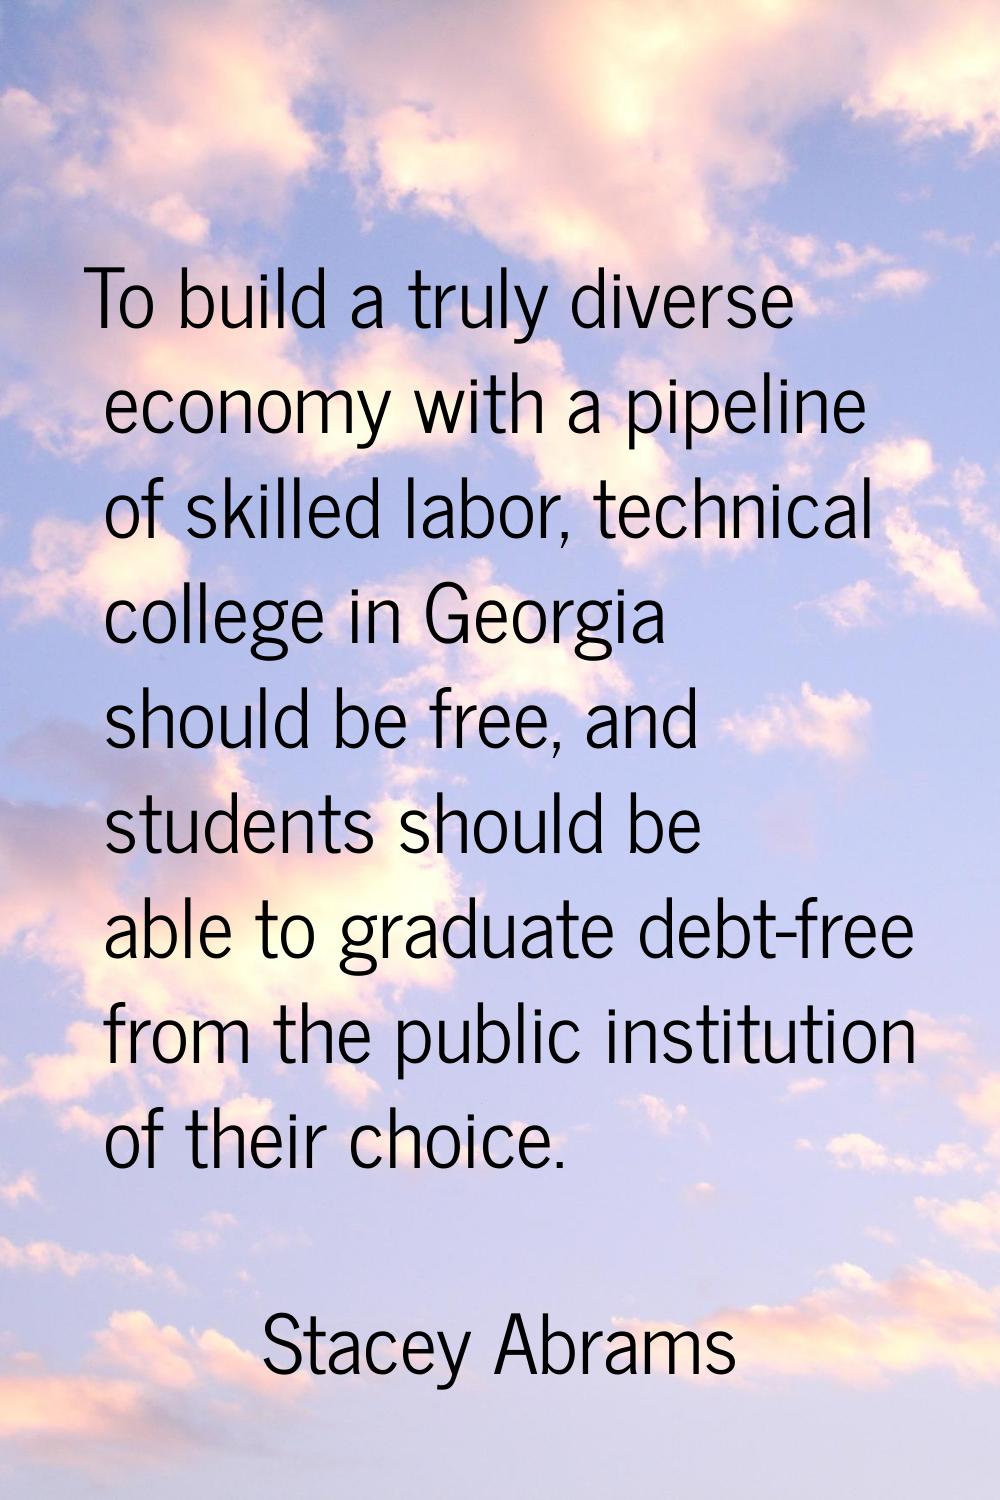 To build a truly diverse economy with a pipeline of skilled labor, technical college in Georgia sho